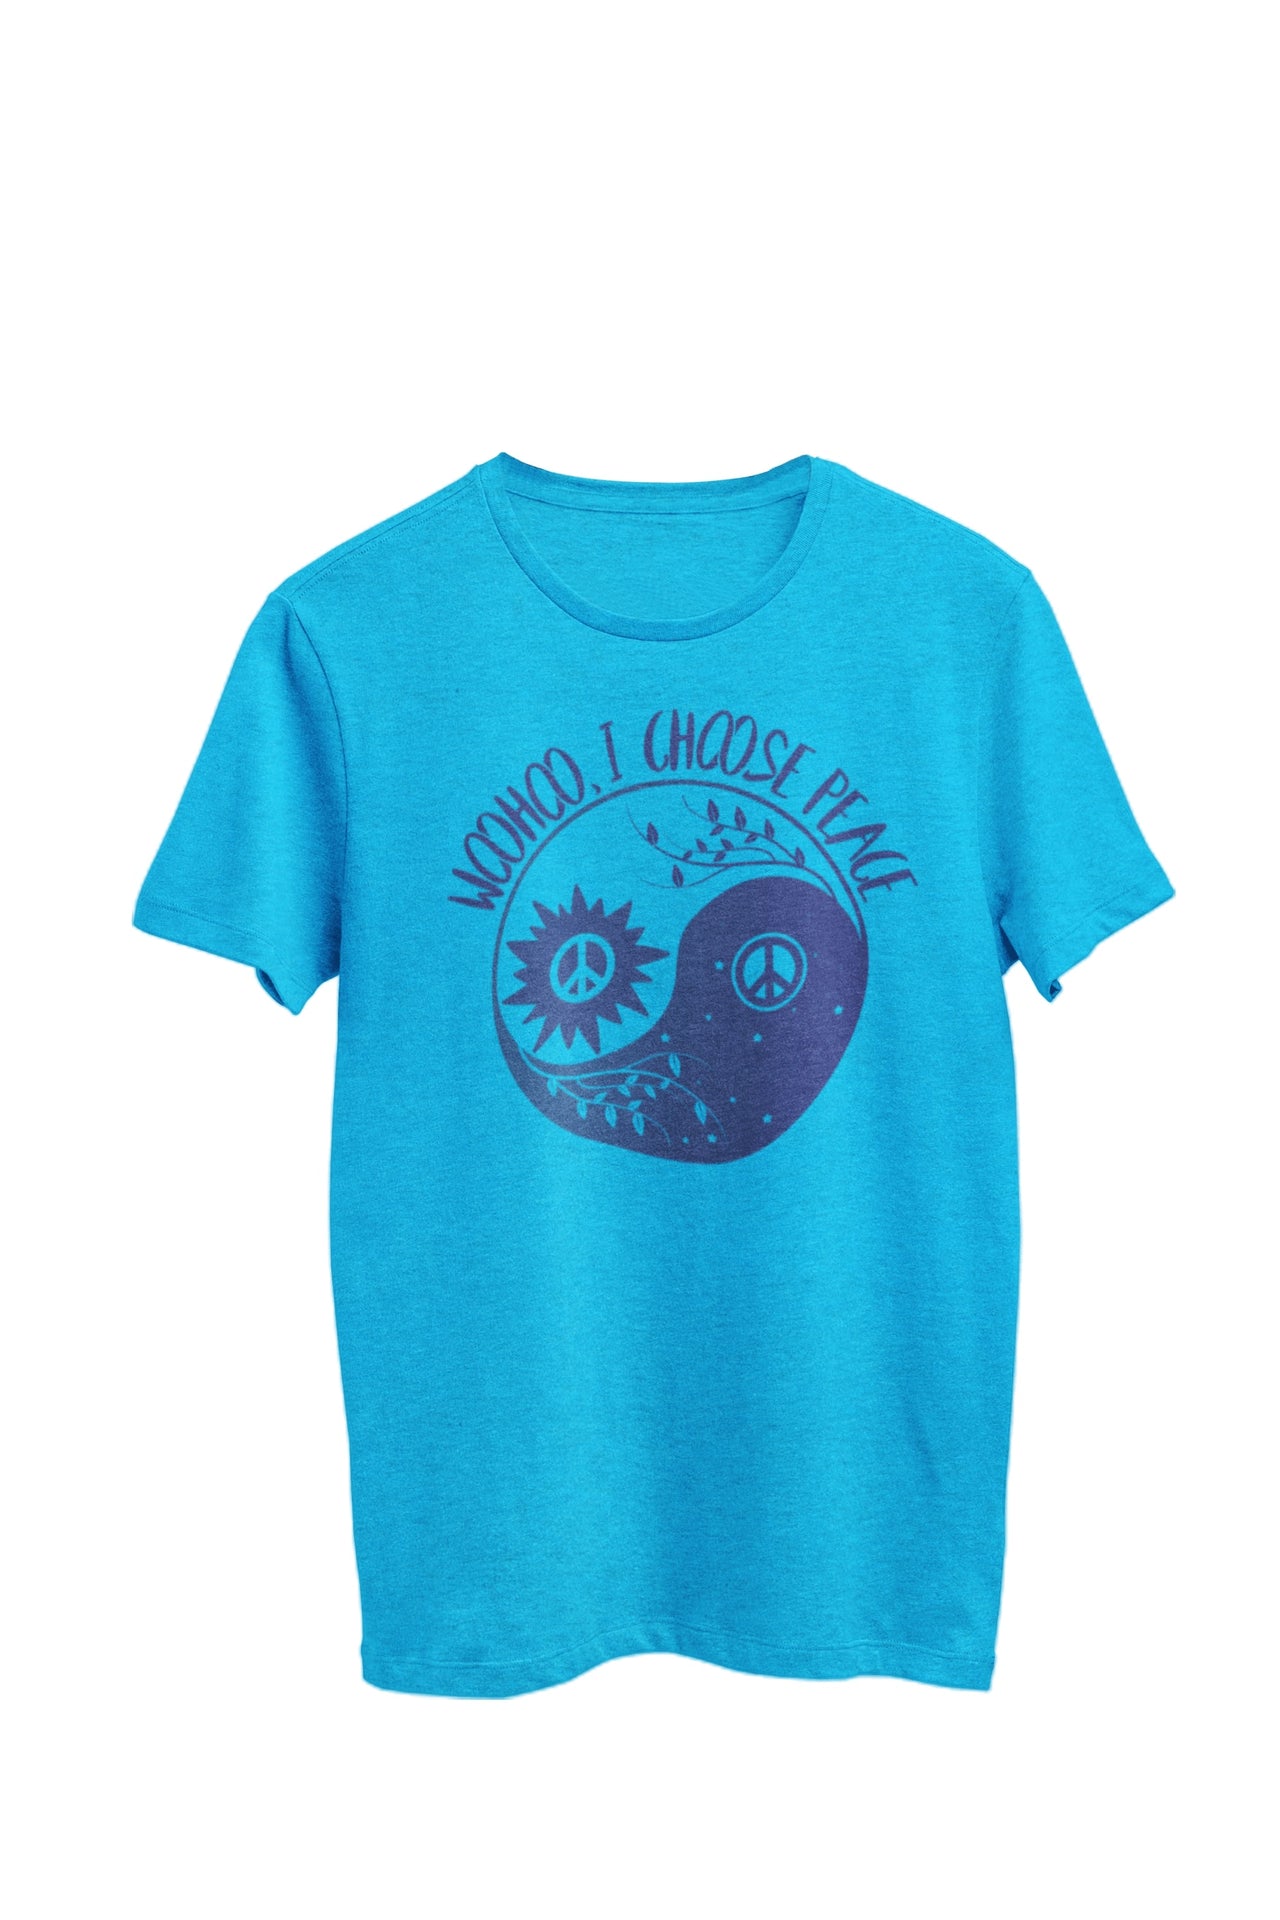 Heather light blue unisex tshirt featuring the text 'WooHoo, I Choose Peace', with a peace symbol within a Yin Yang design. Designed by WooHoo Apparel.